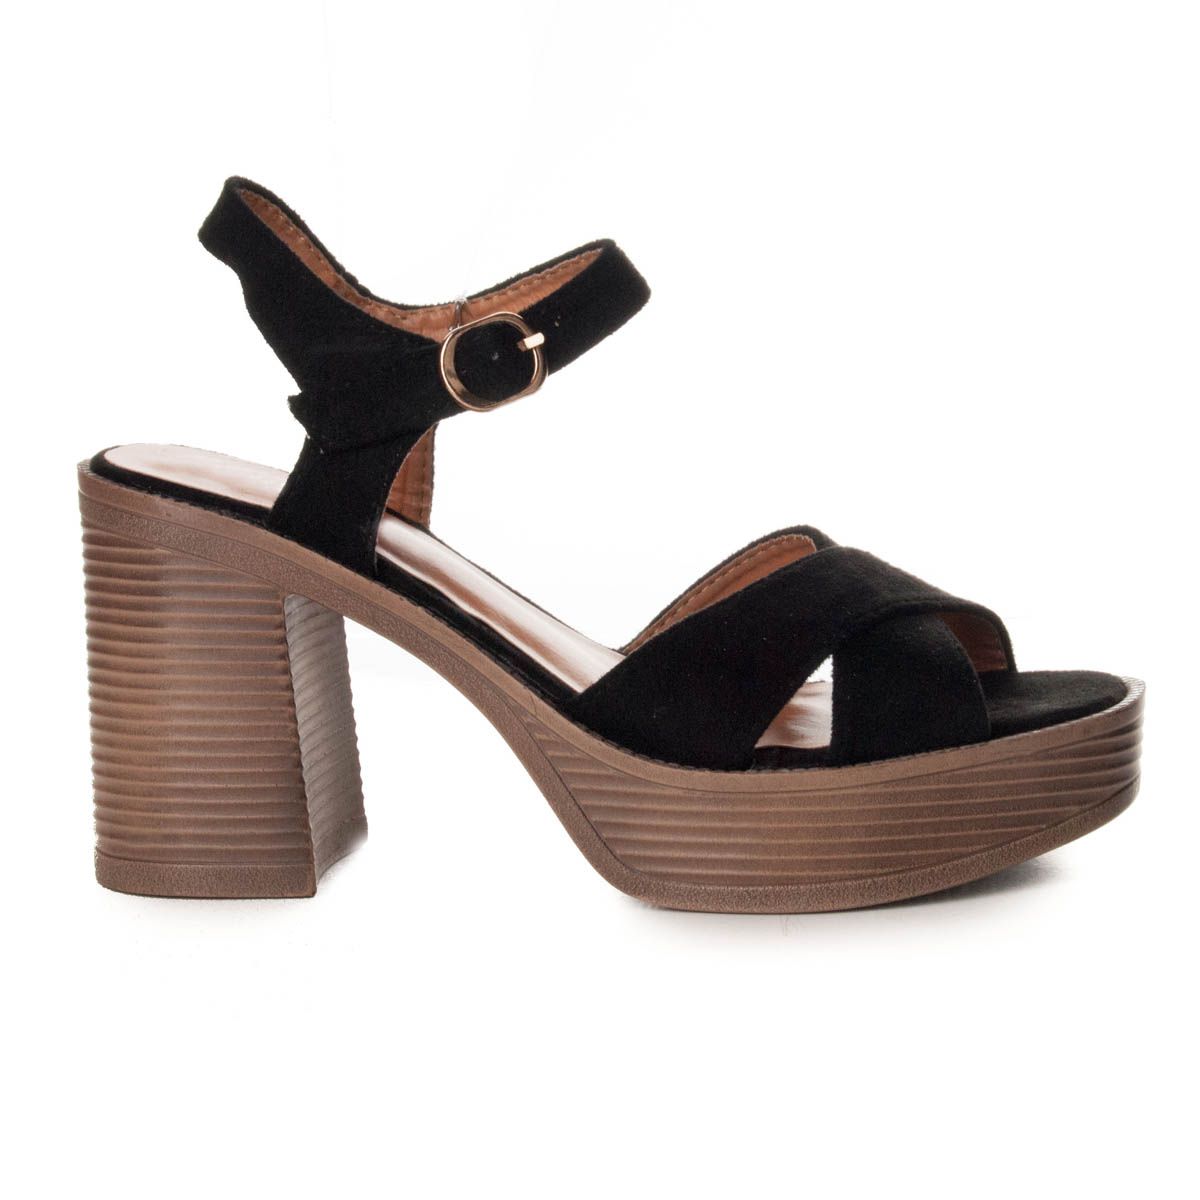 Platform and polyurethane heel sandal, material tendency for its elegance and lightness. It's not heavy. It is a very comfortable sandal also for its padded plant, and therefore it is ideal for any occasion. Fastened on the ankle by a metal brooch. You can not fail in your closet this summer.